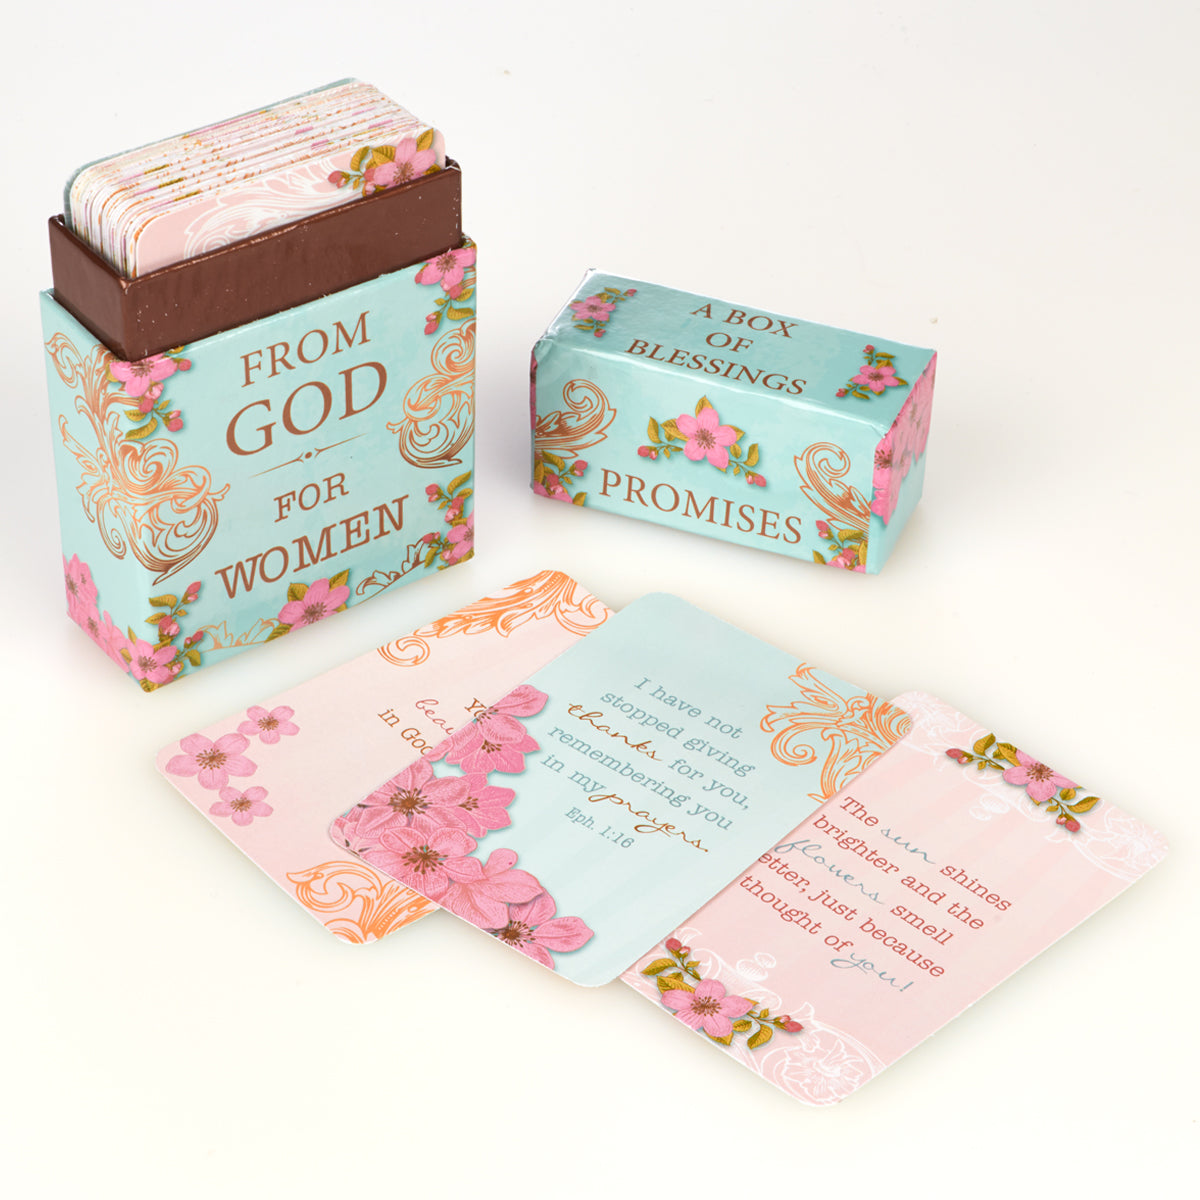 Image of Promises from God for Women Box of Blessings other